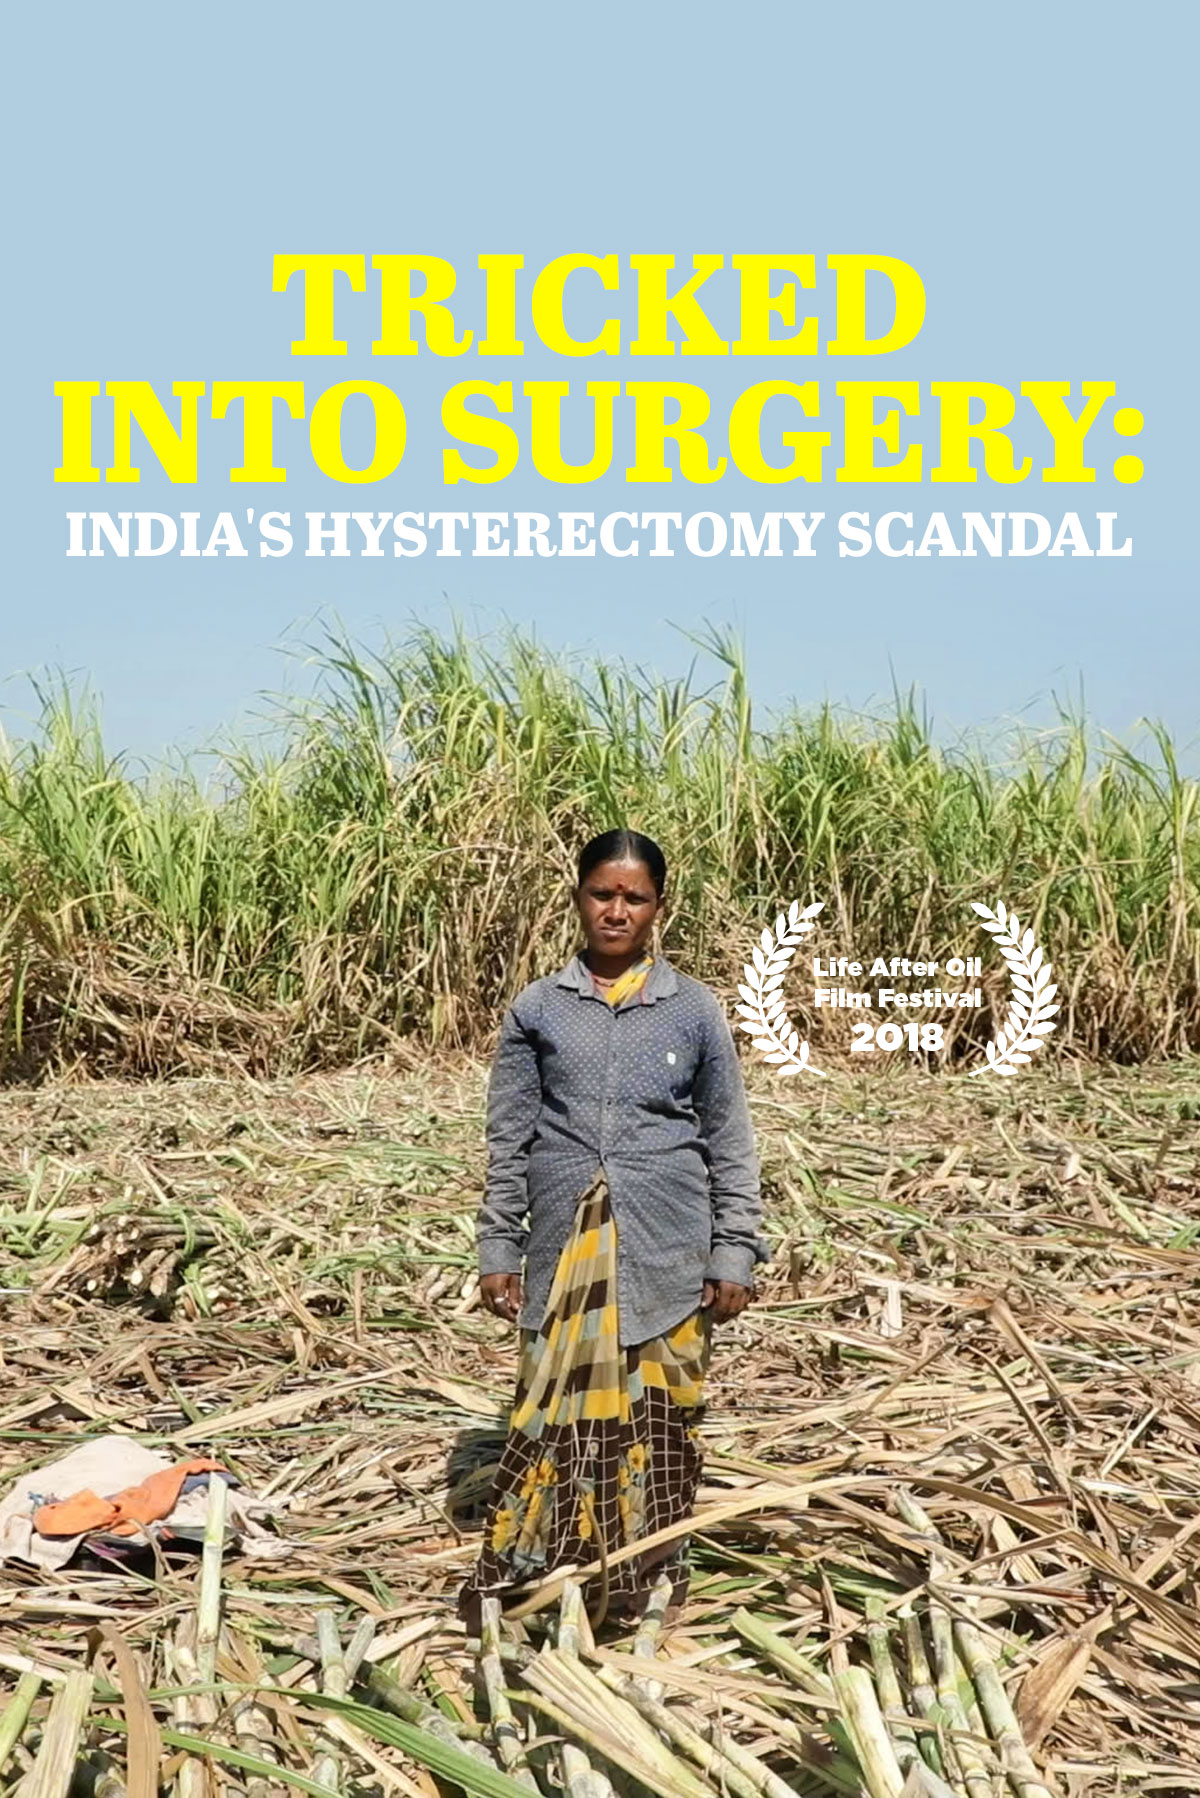 Tricked Into Surgery: India's Hysterectomy Scandal